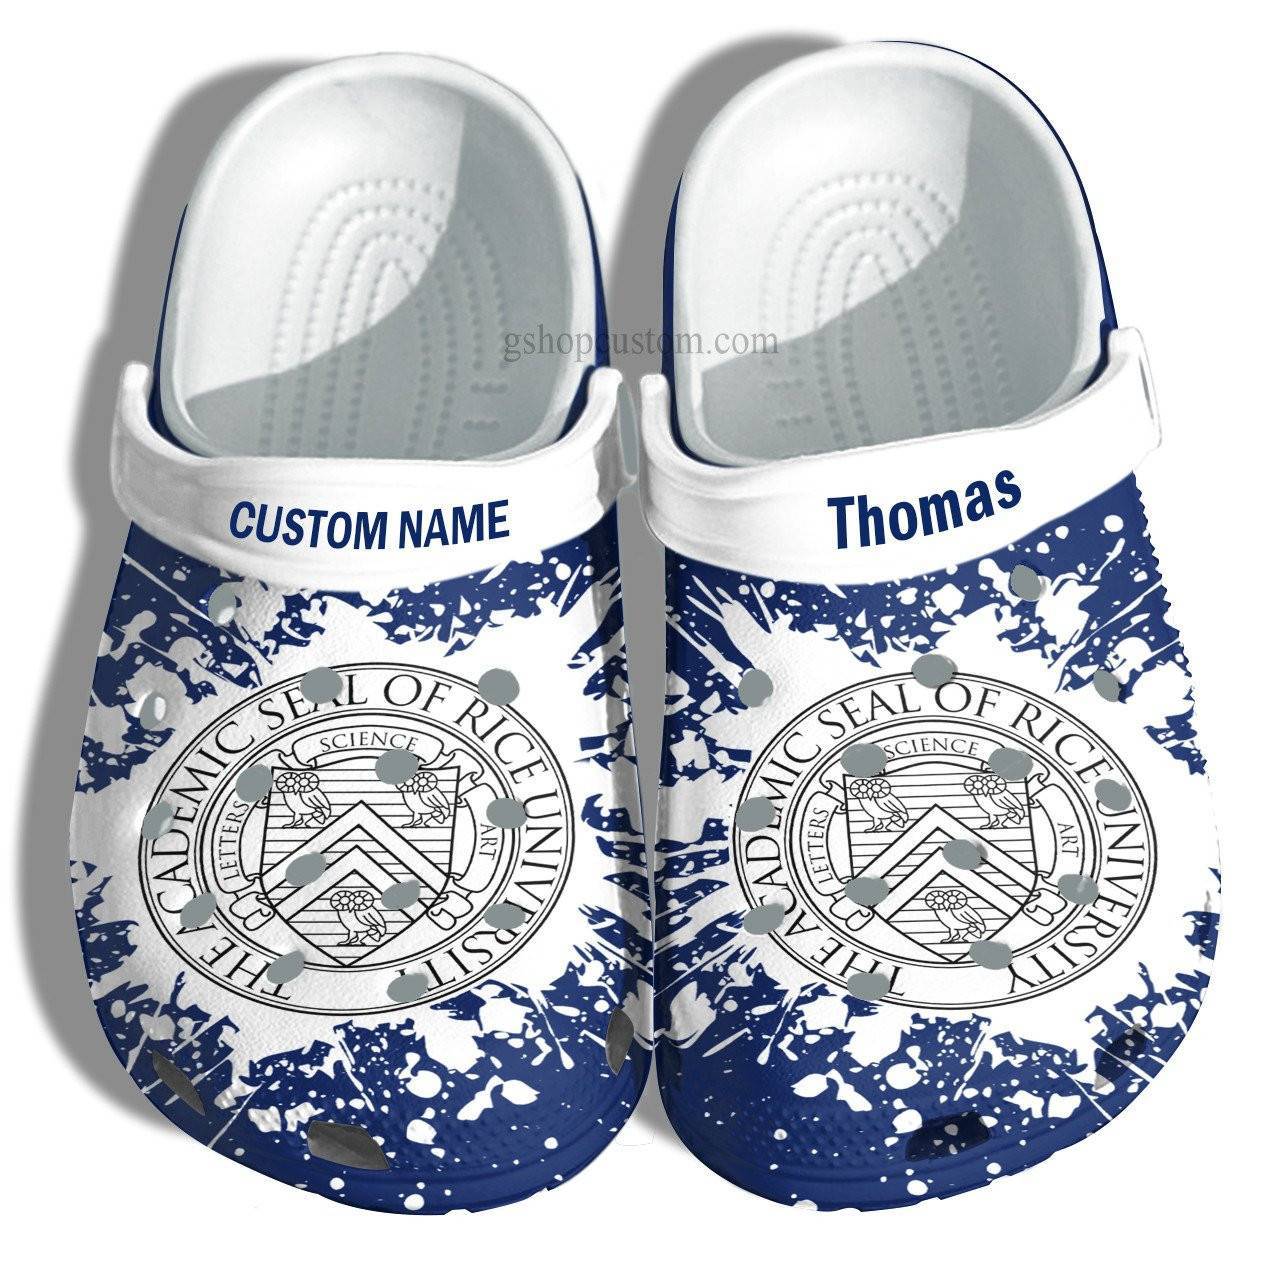 William Marsh Rice University Graduation Gifts Croc Shoes Customize – Admission Gift Crocss Shoes